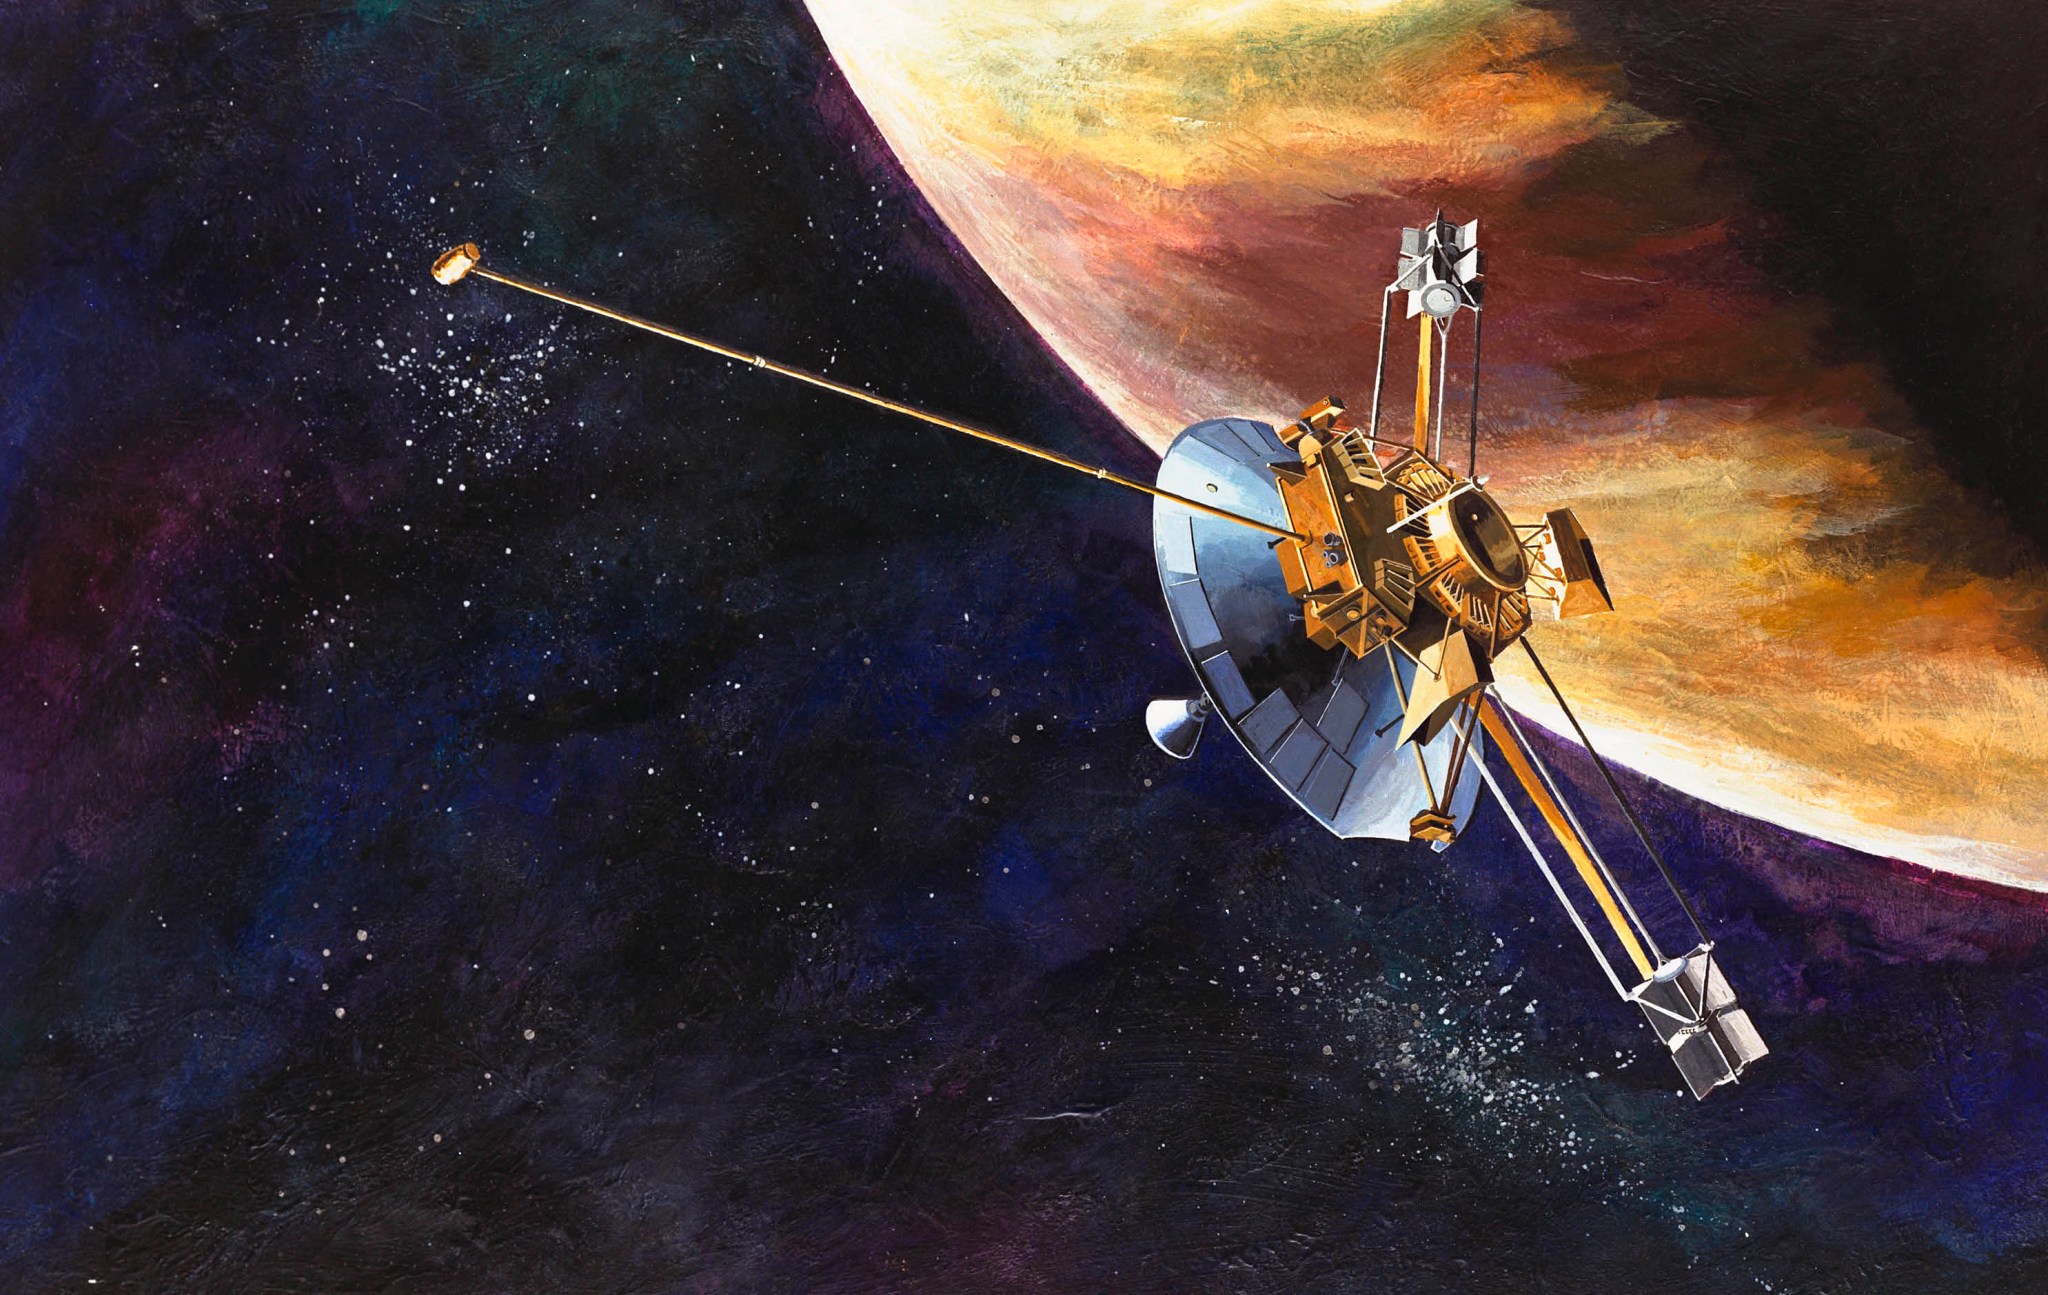 An artist's concept of the Pioneer 10 spacecraft.